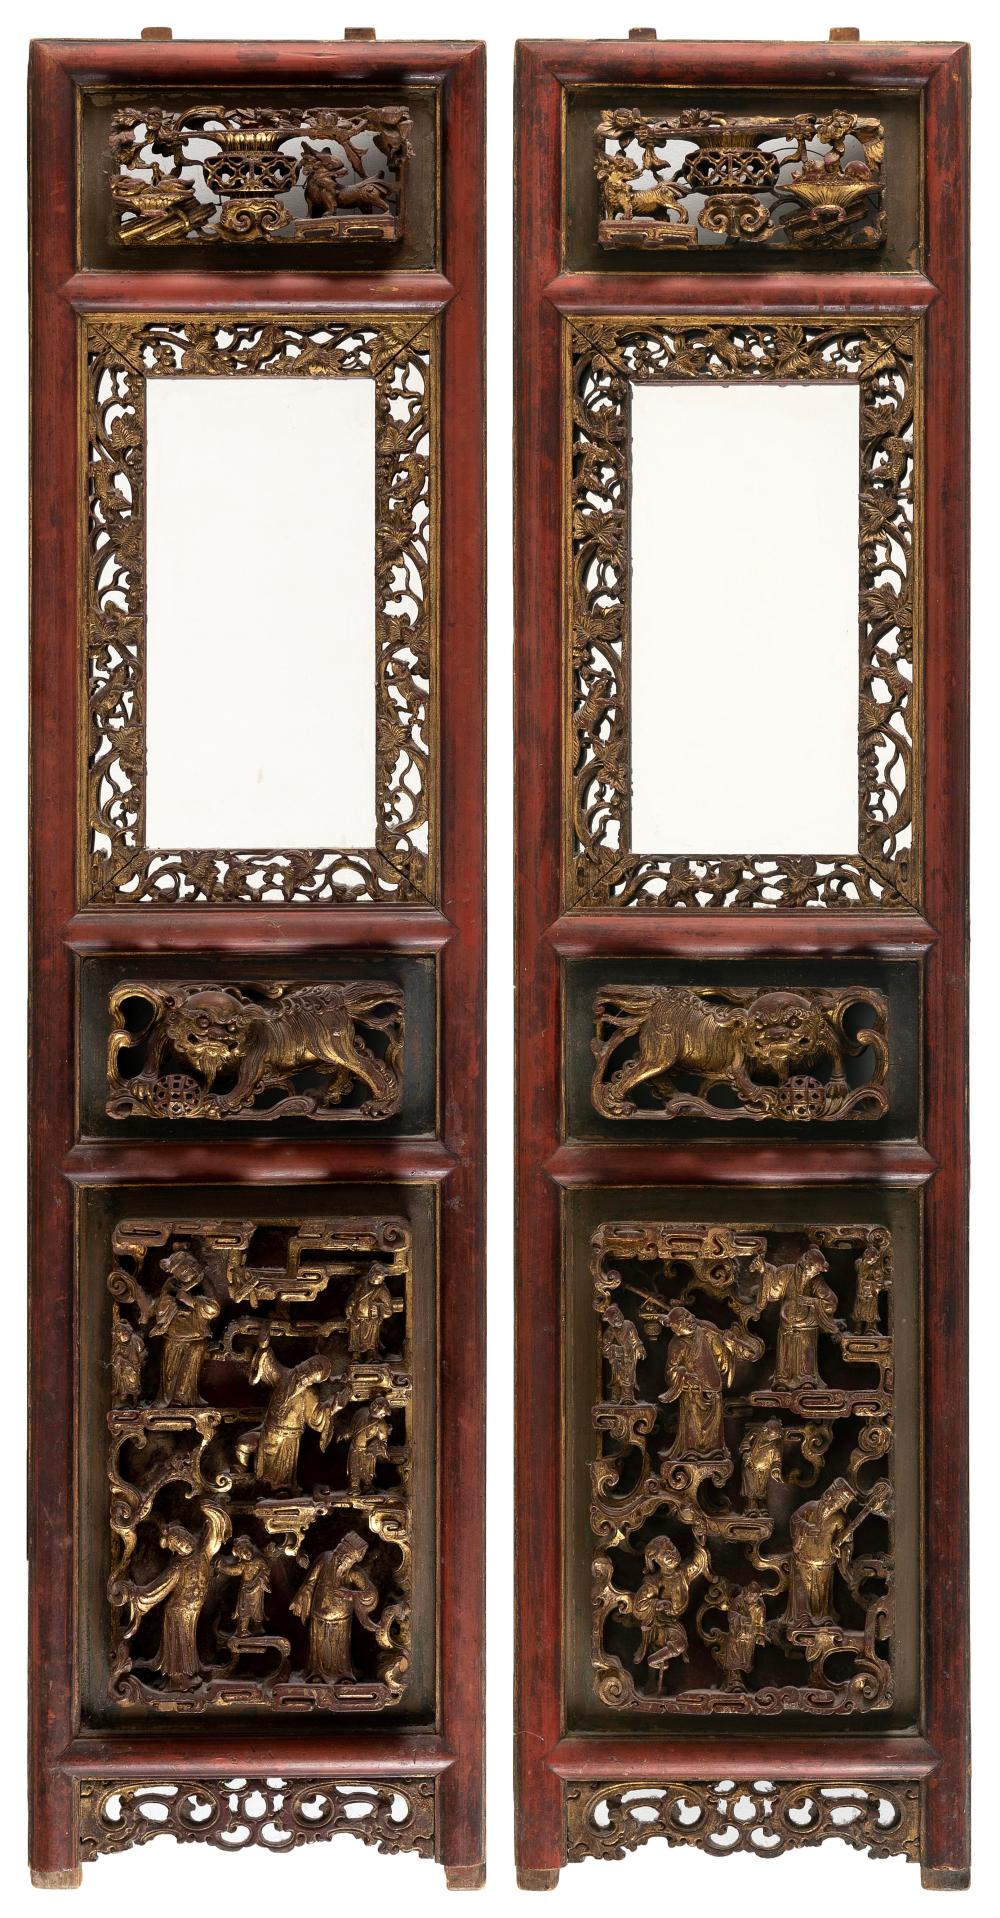 PAIR OF CHINESE FINELY CARVED RED